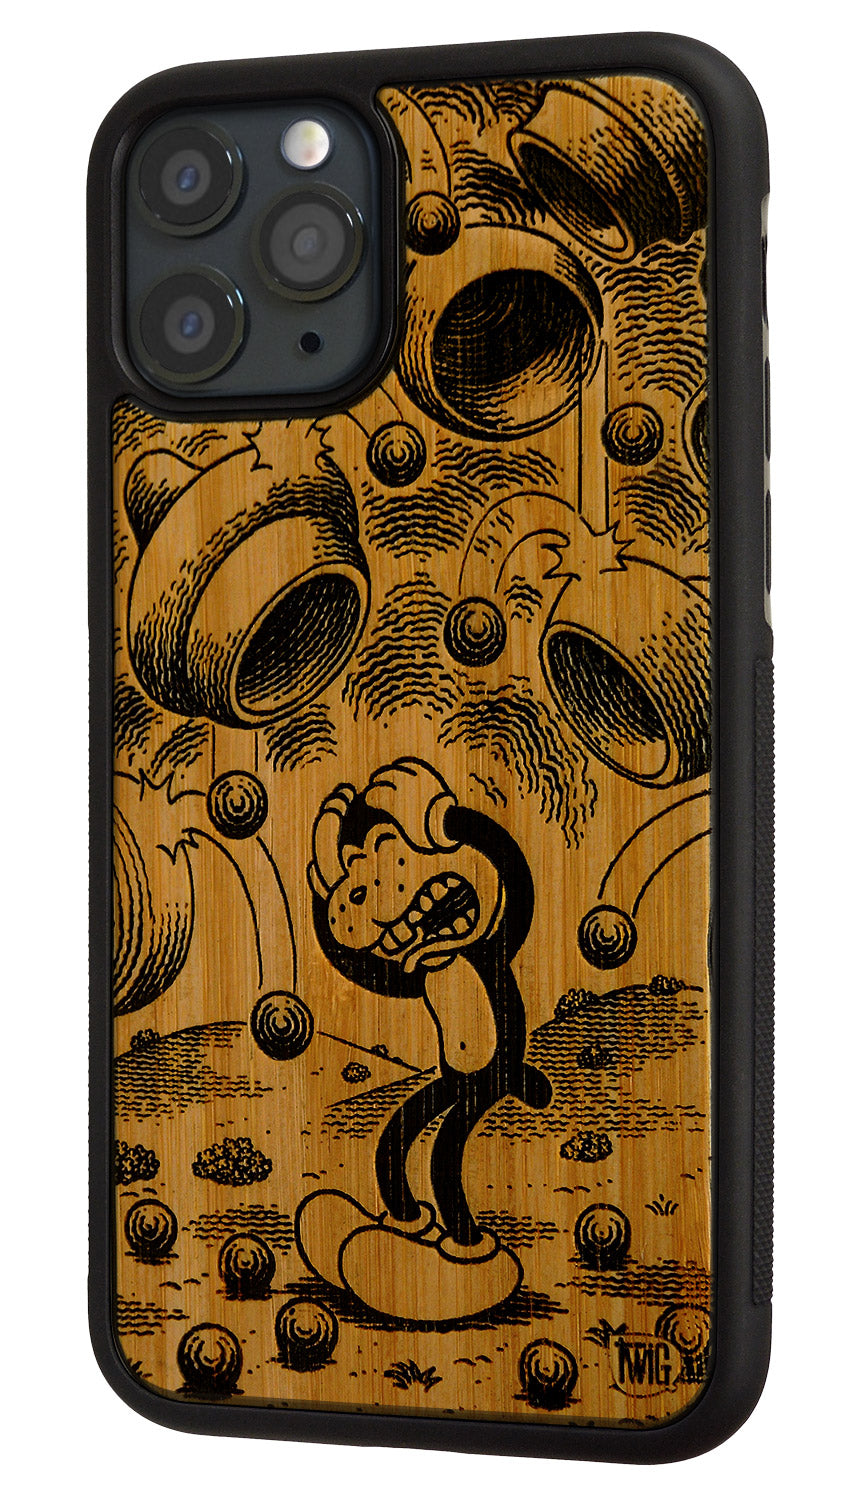 Loud Day - Bamboo iPhone Case, iPhone Case - Twig Case Co.